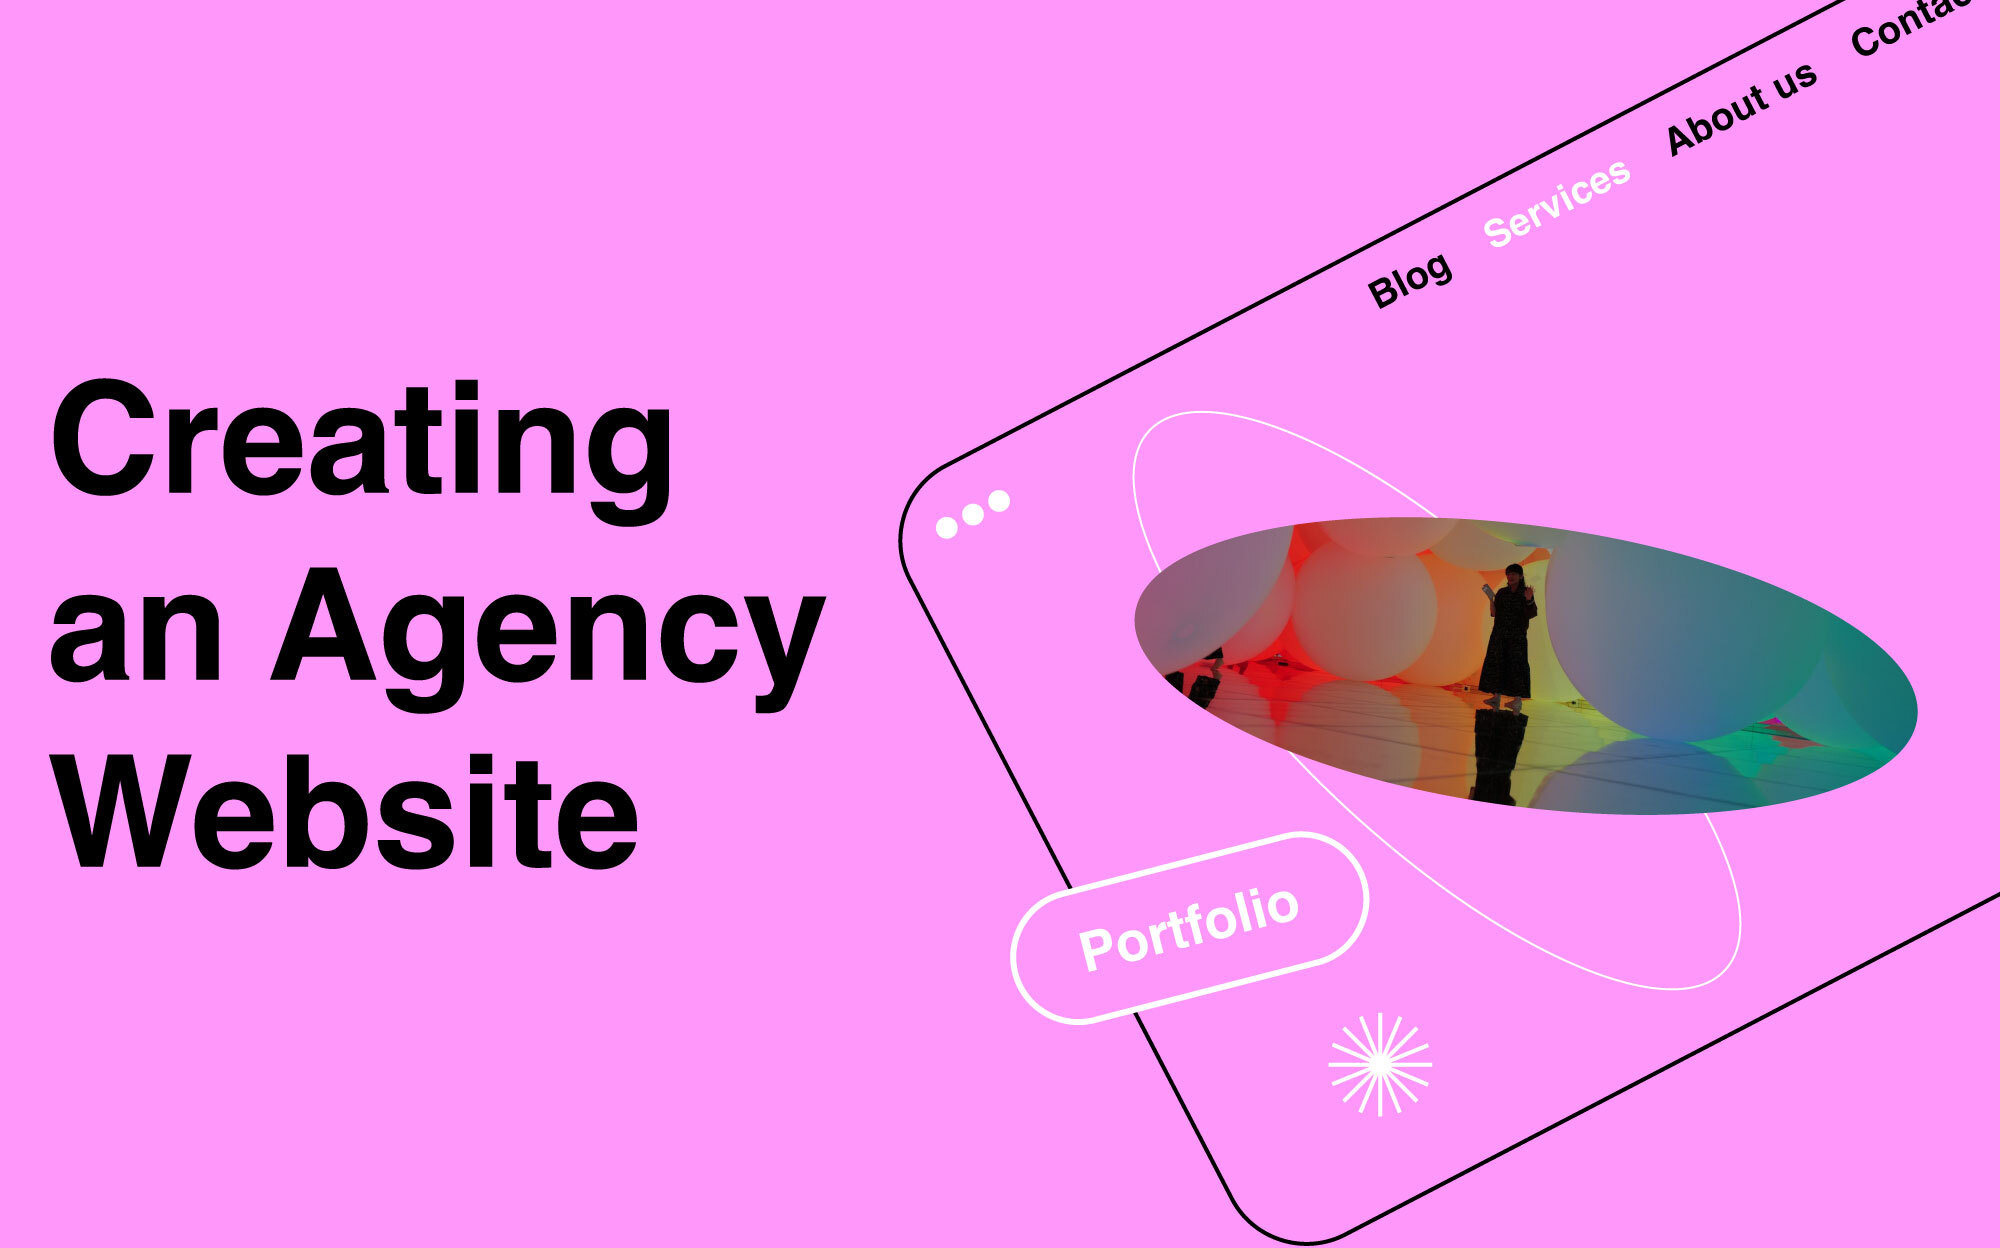 How to Create an Agency Website: Step-by-Step Guide